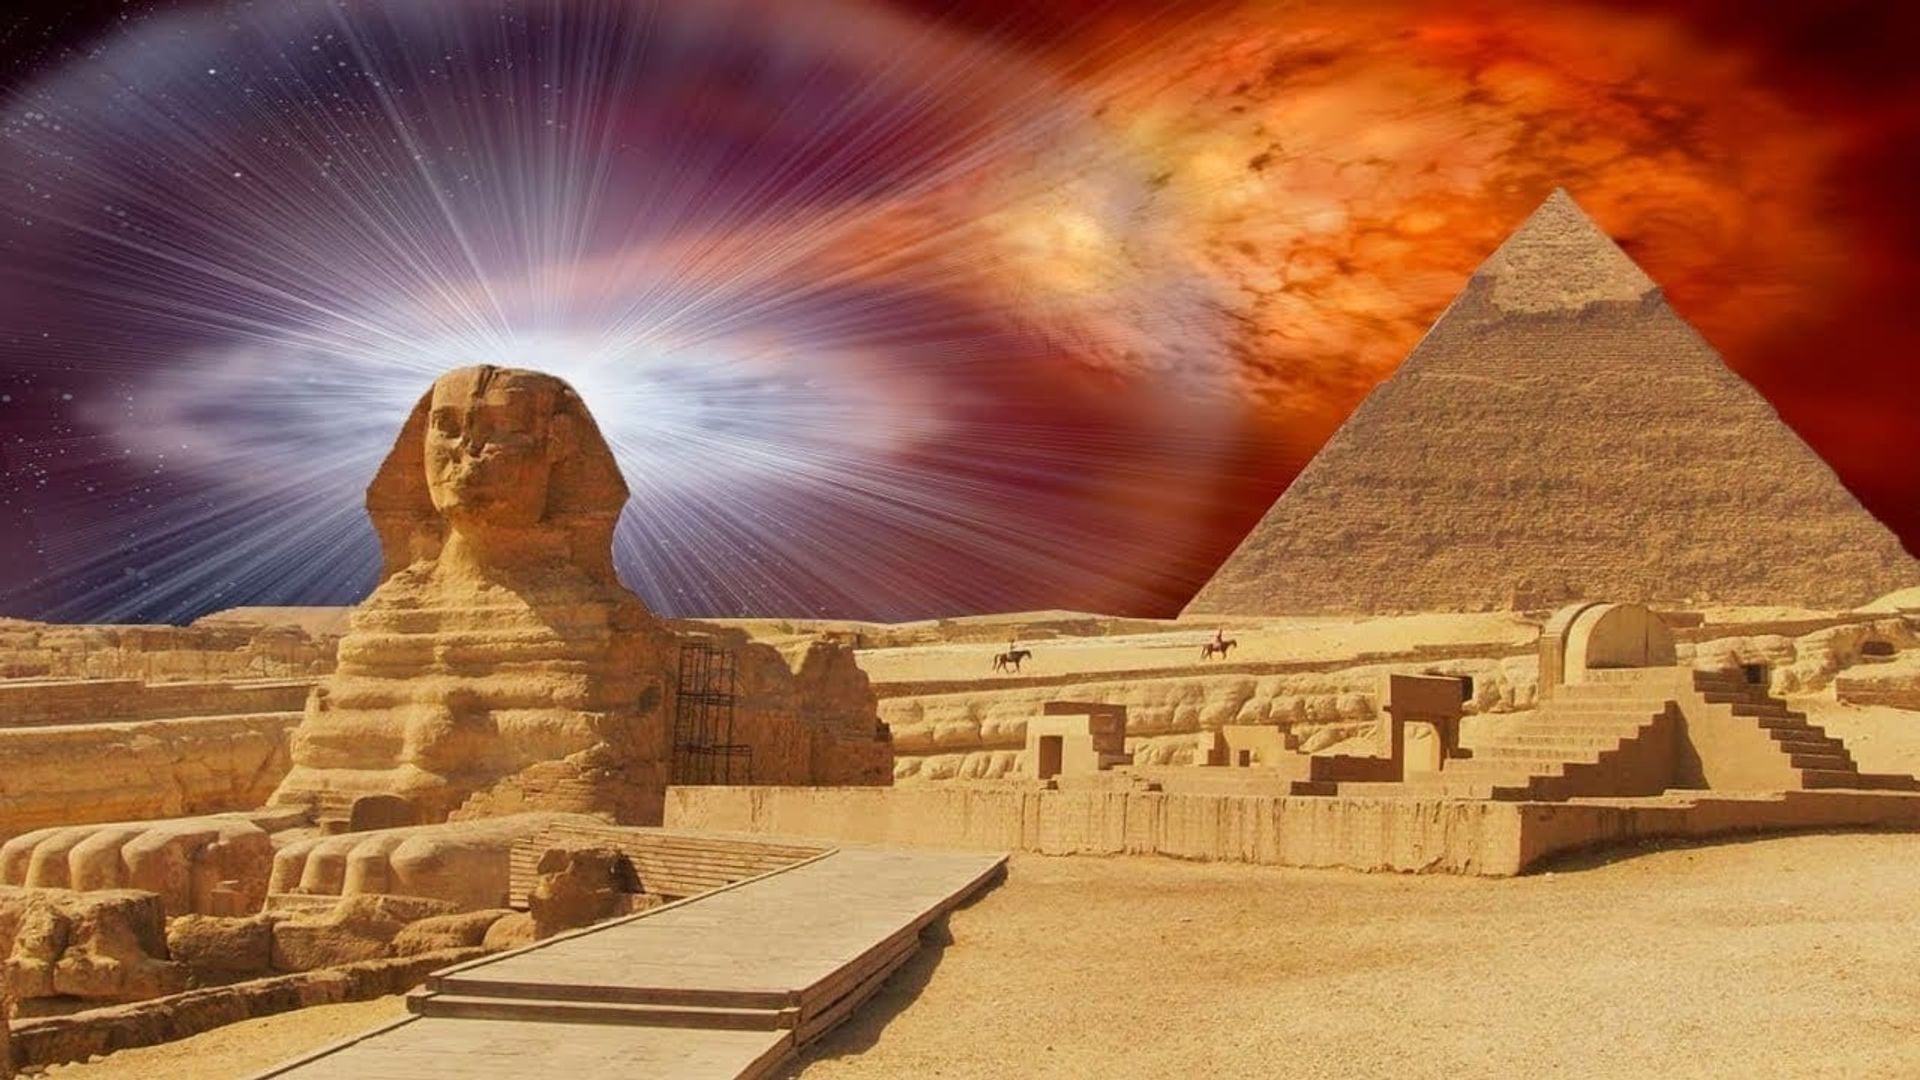 The Revelation of the Pyramids background